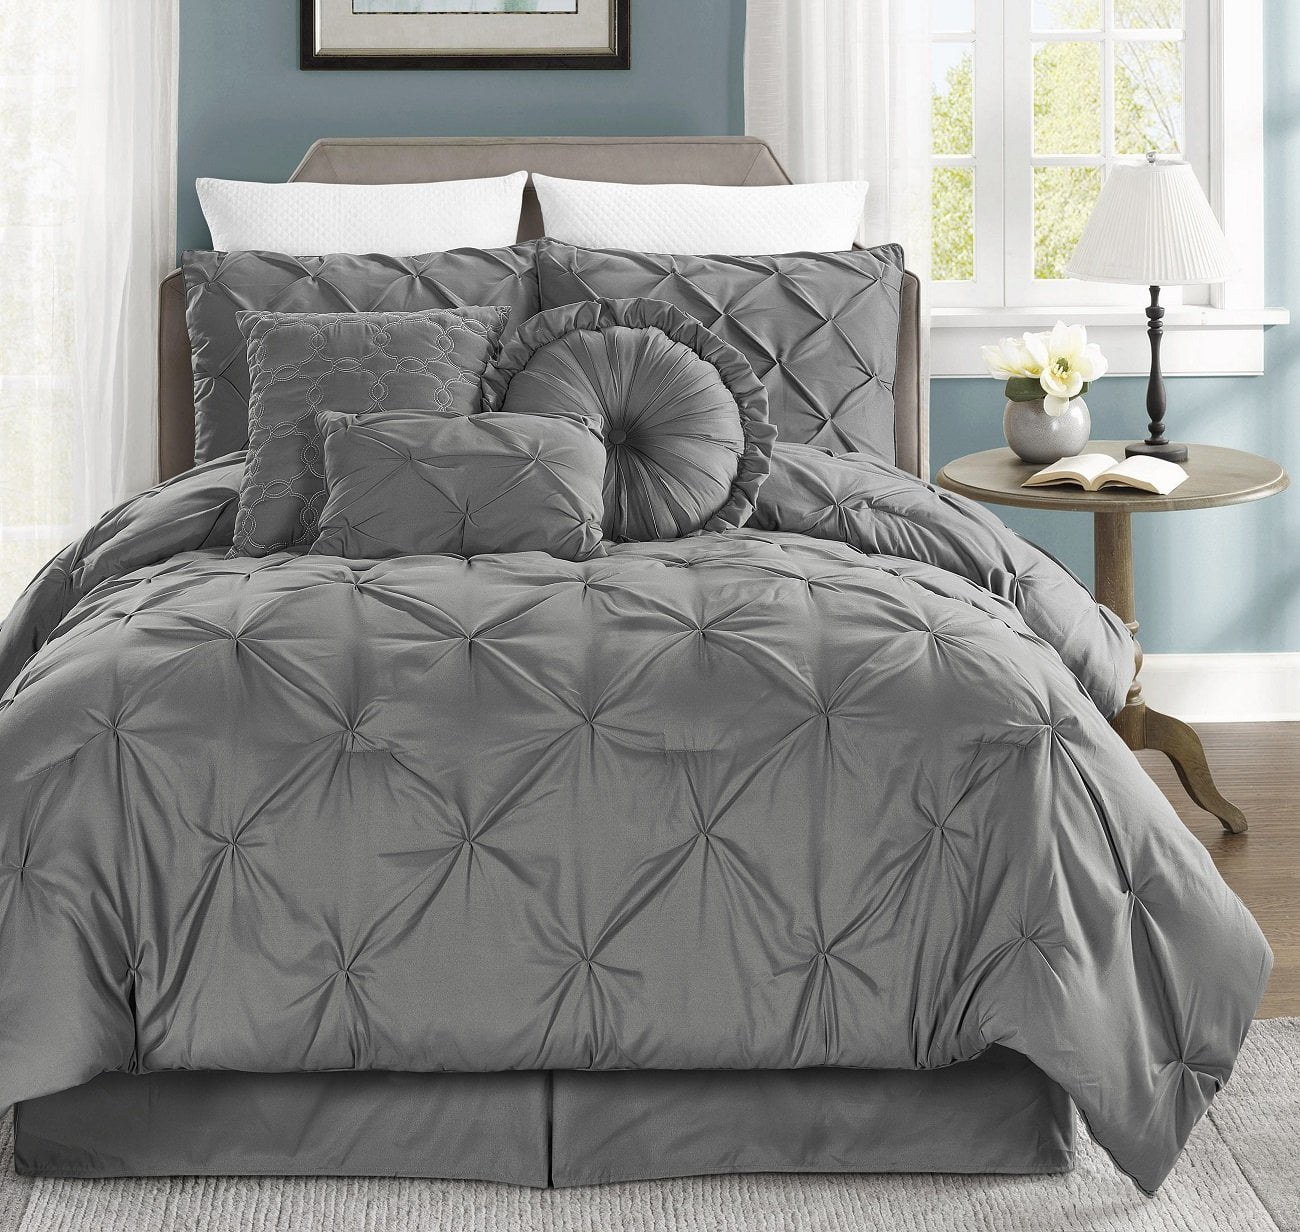 Easy Care Wrinkle Free King Bedding Set of 3 Pcs Grey, King Duvet Cover Set Linen Home Pintuck Grey King Duvet Set Pinch Pleat Soft Microfibre King Bed Quilt Cover with 2 Pillowcases